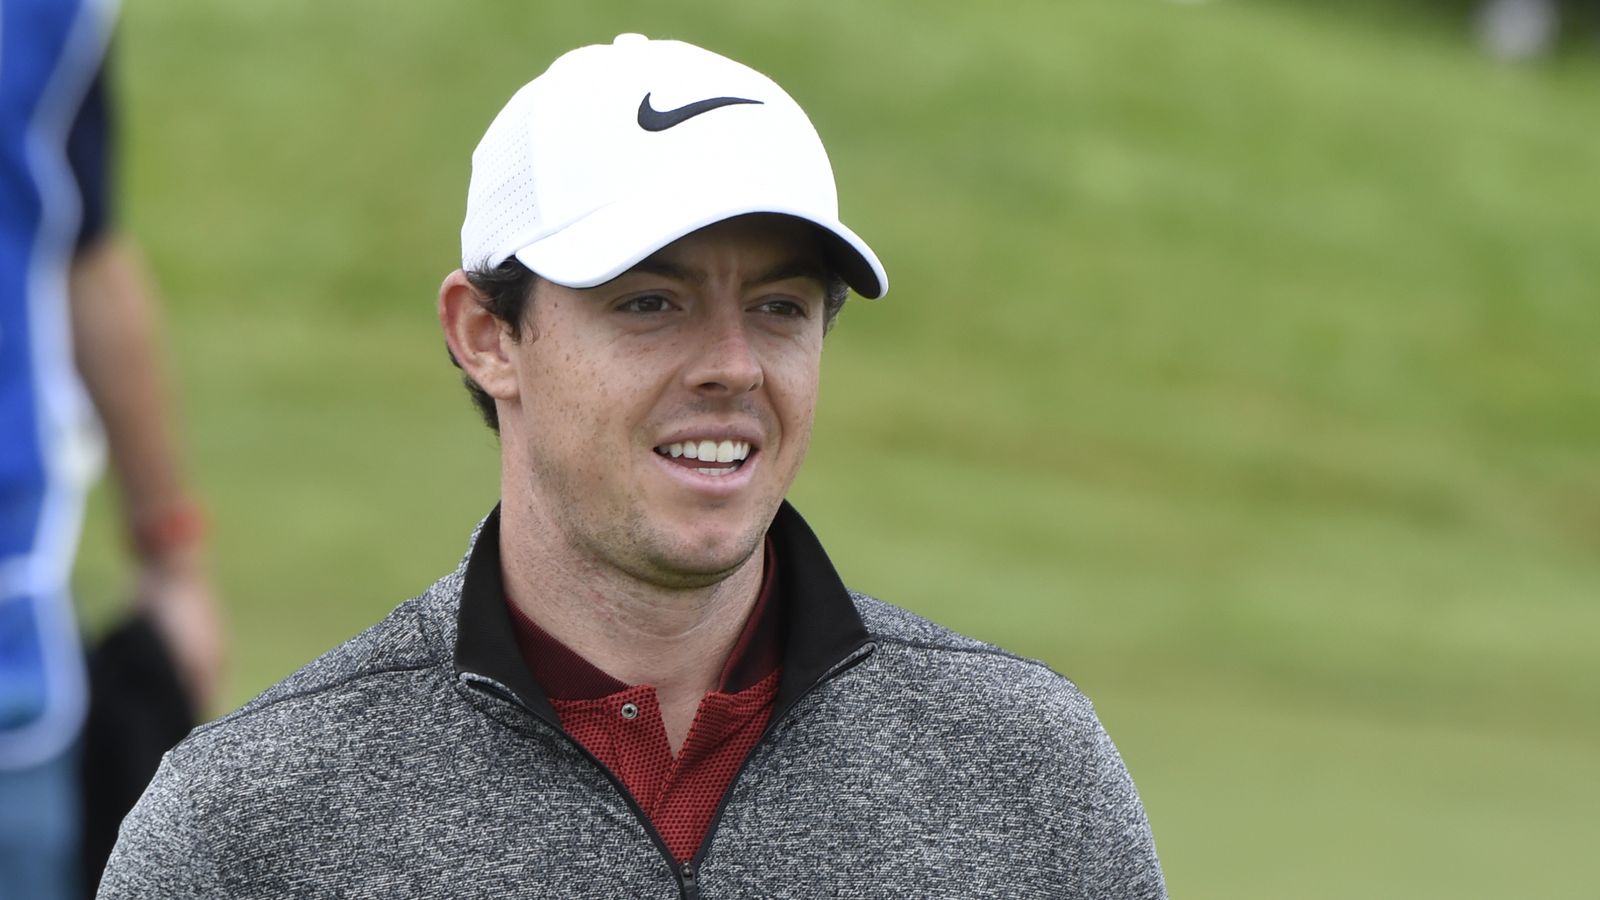 Rory McIlroy focused on swing over score in France | Golf News | Sky Sports